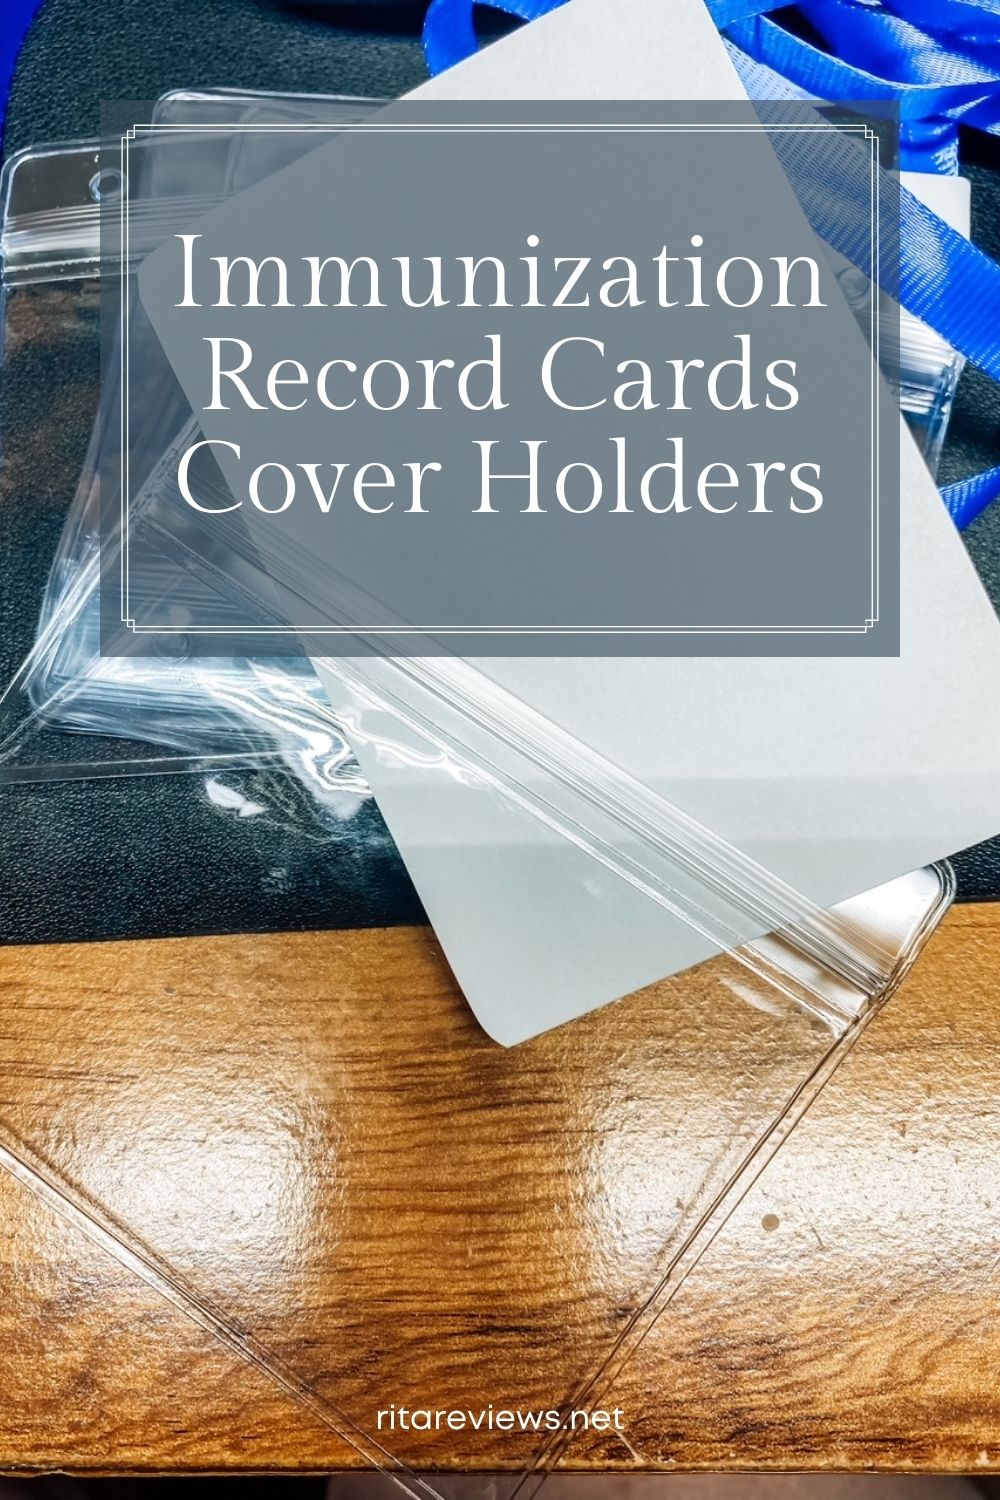 Immunization Record Cards Cover Holders